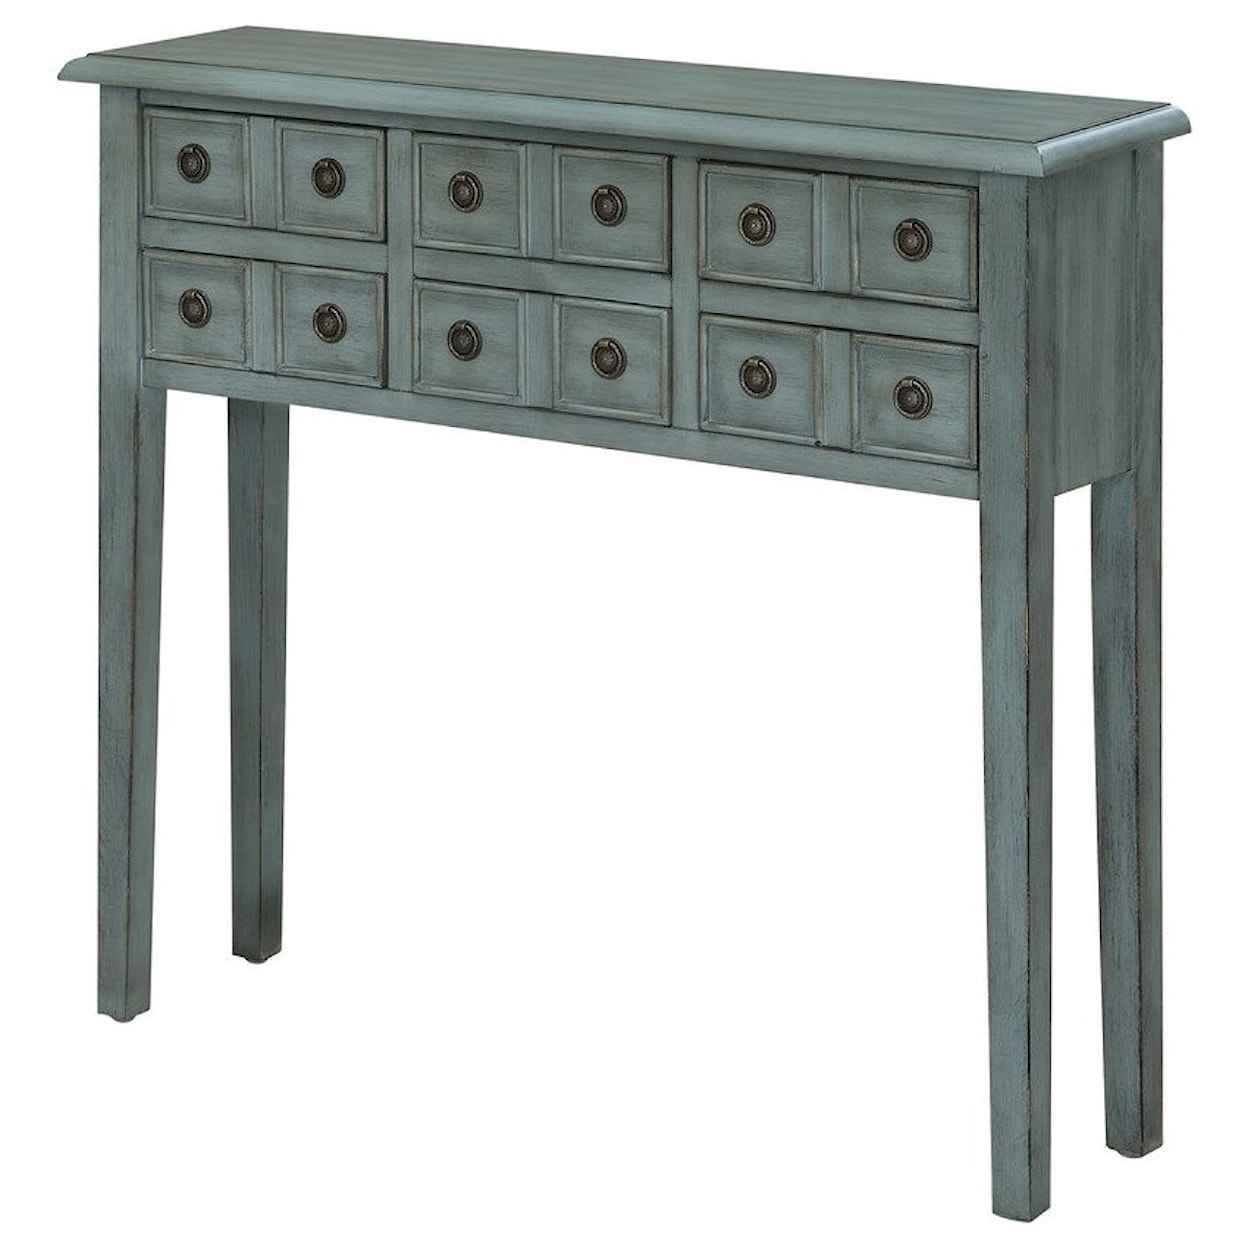 Crestview Collection Accent Furniture Florence 6 Drawer Teal Console